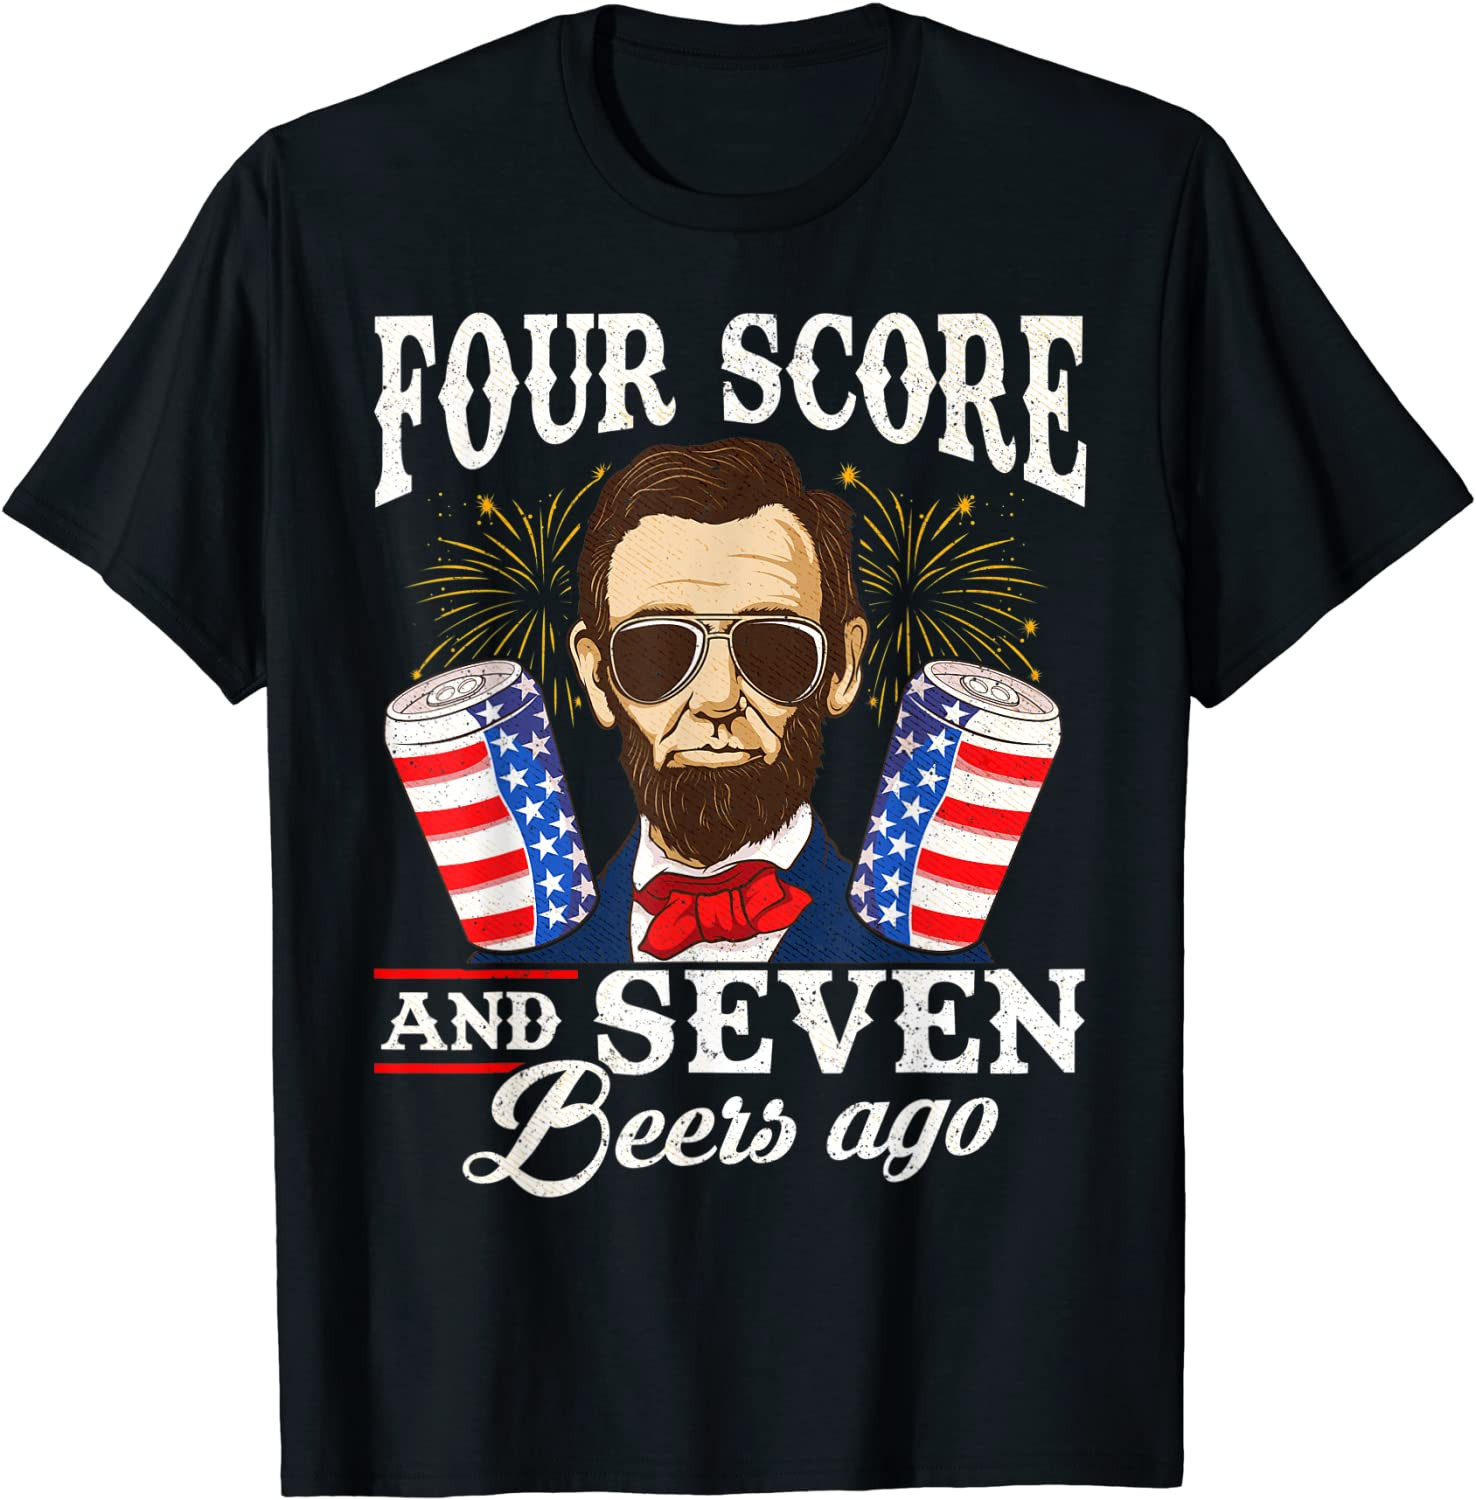 Four Score And 7 Beers Ago 4th Of July Drinking Like Lincoln T-Shirt